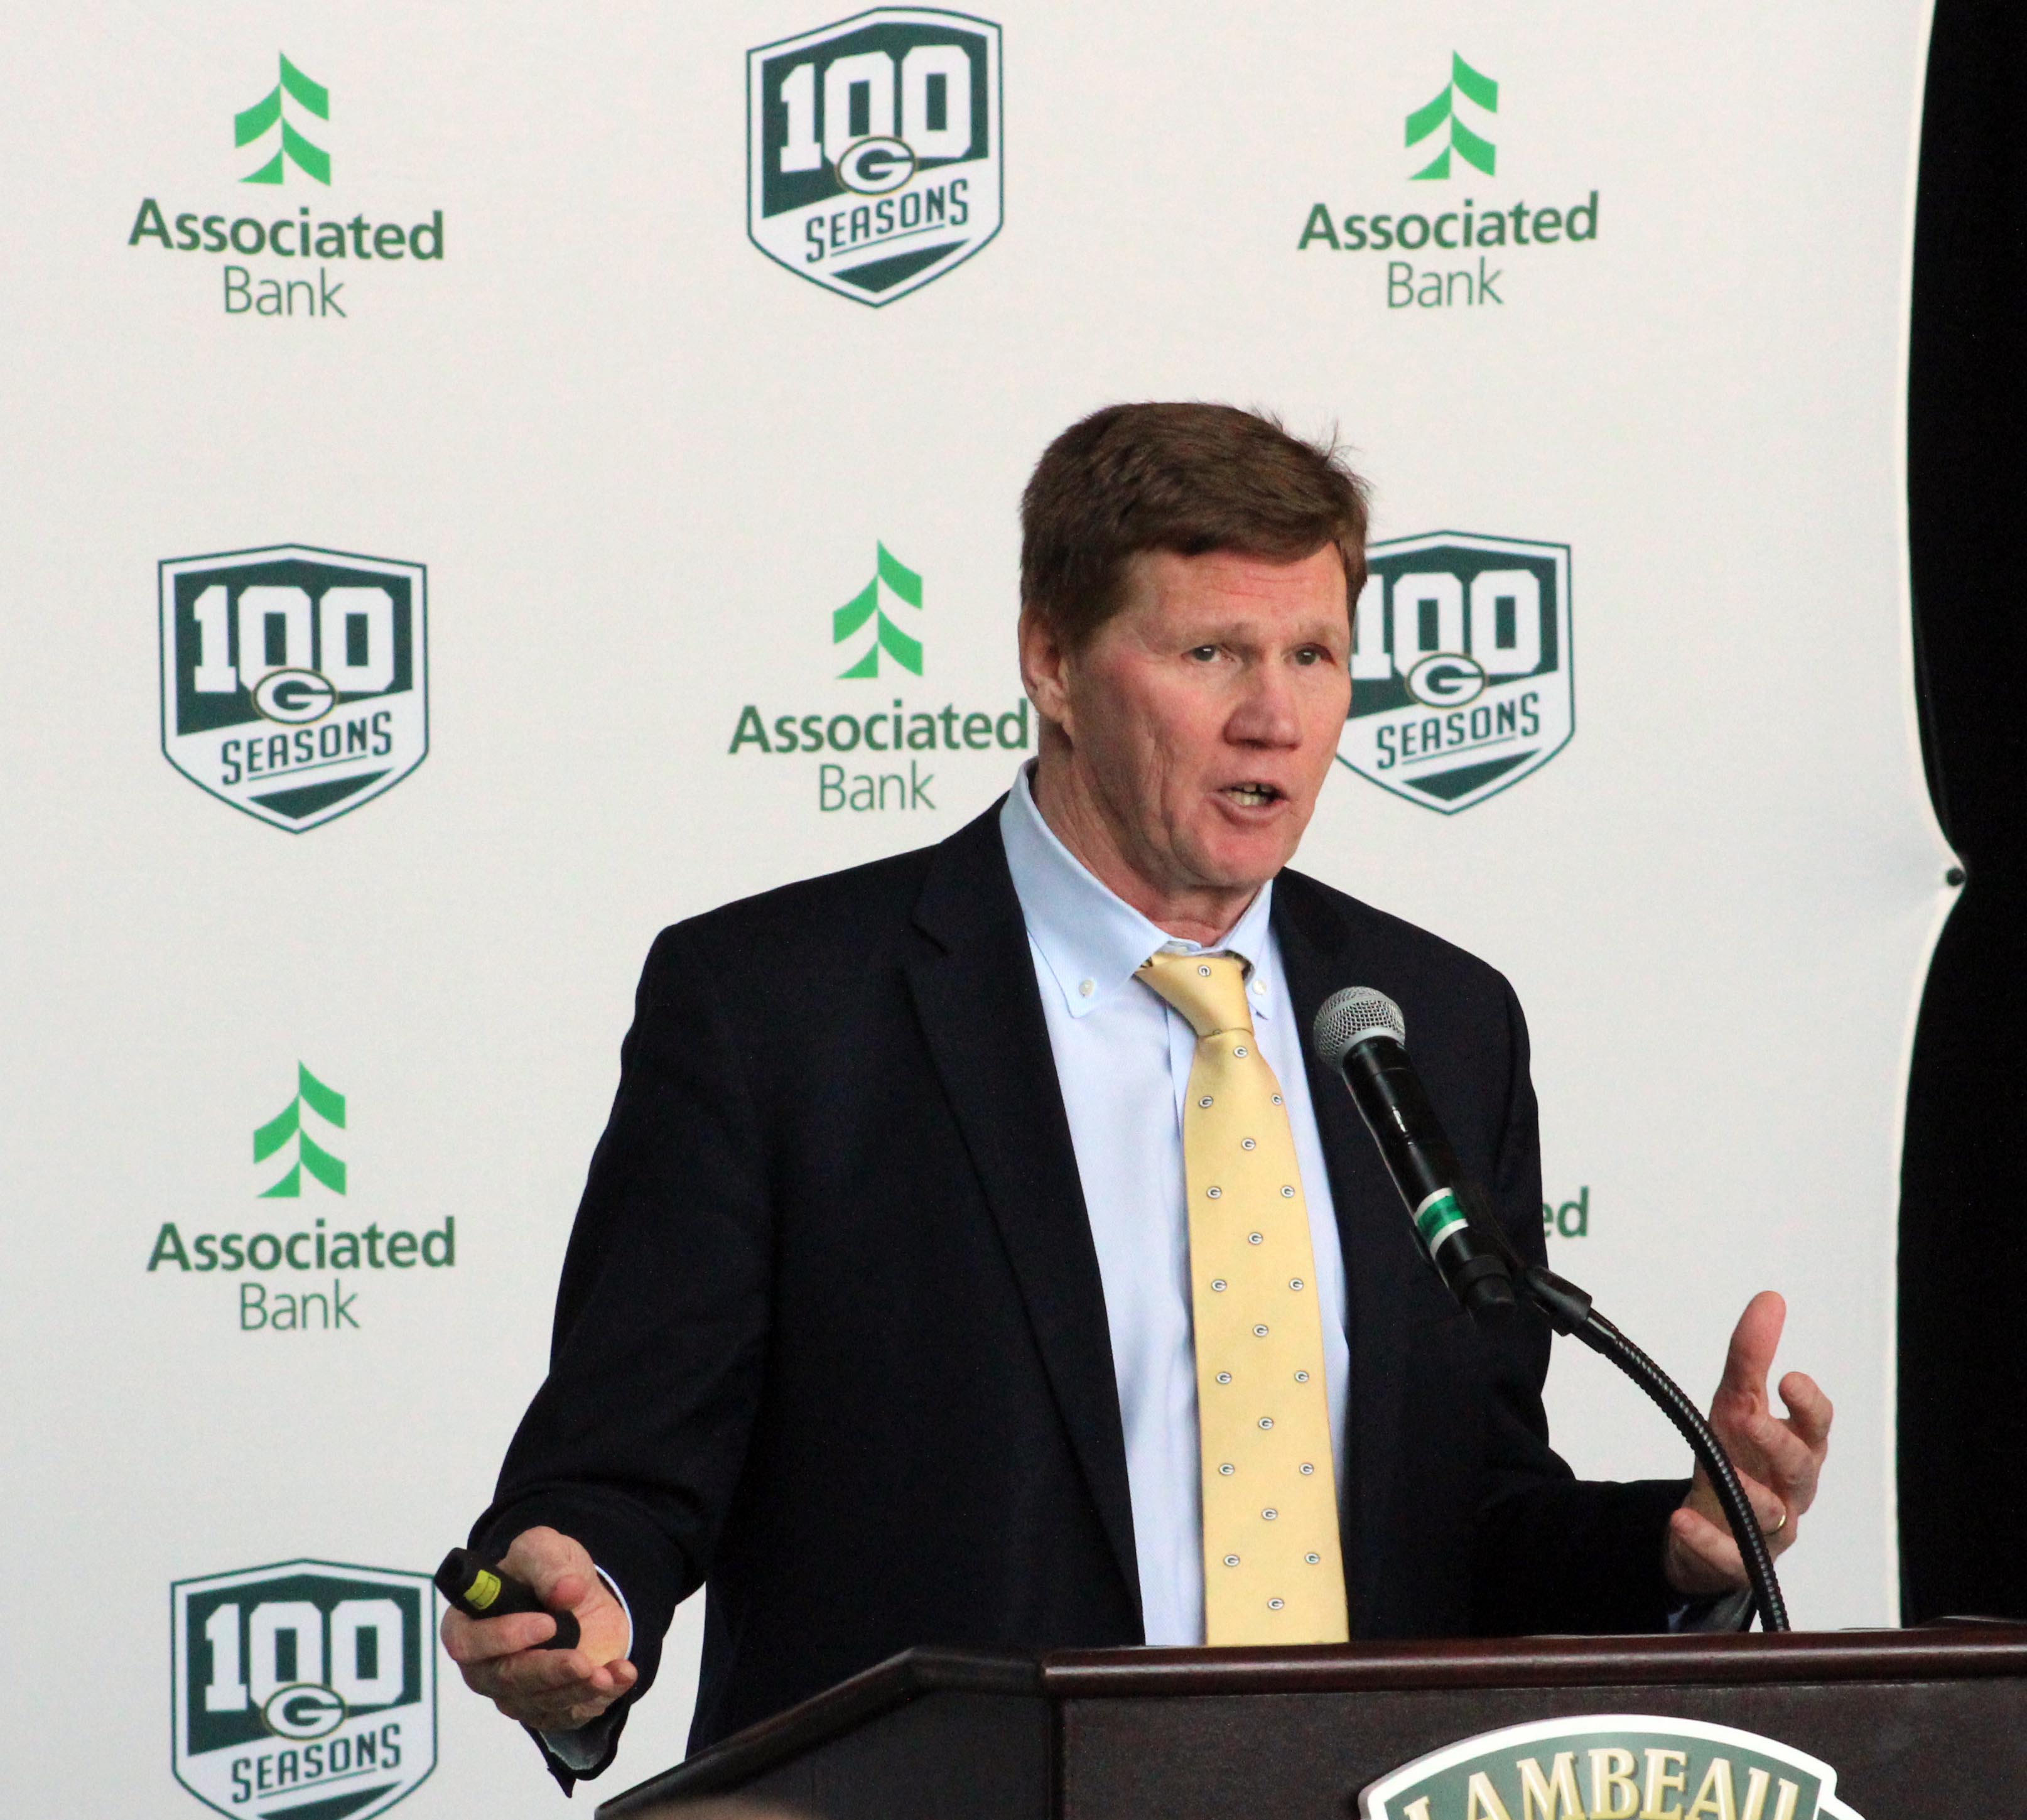 Packers announce plans to celebrate 100 seasons